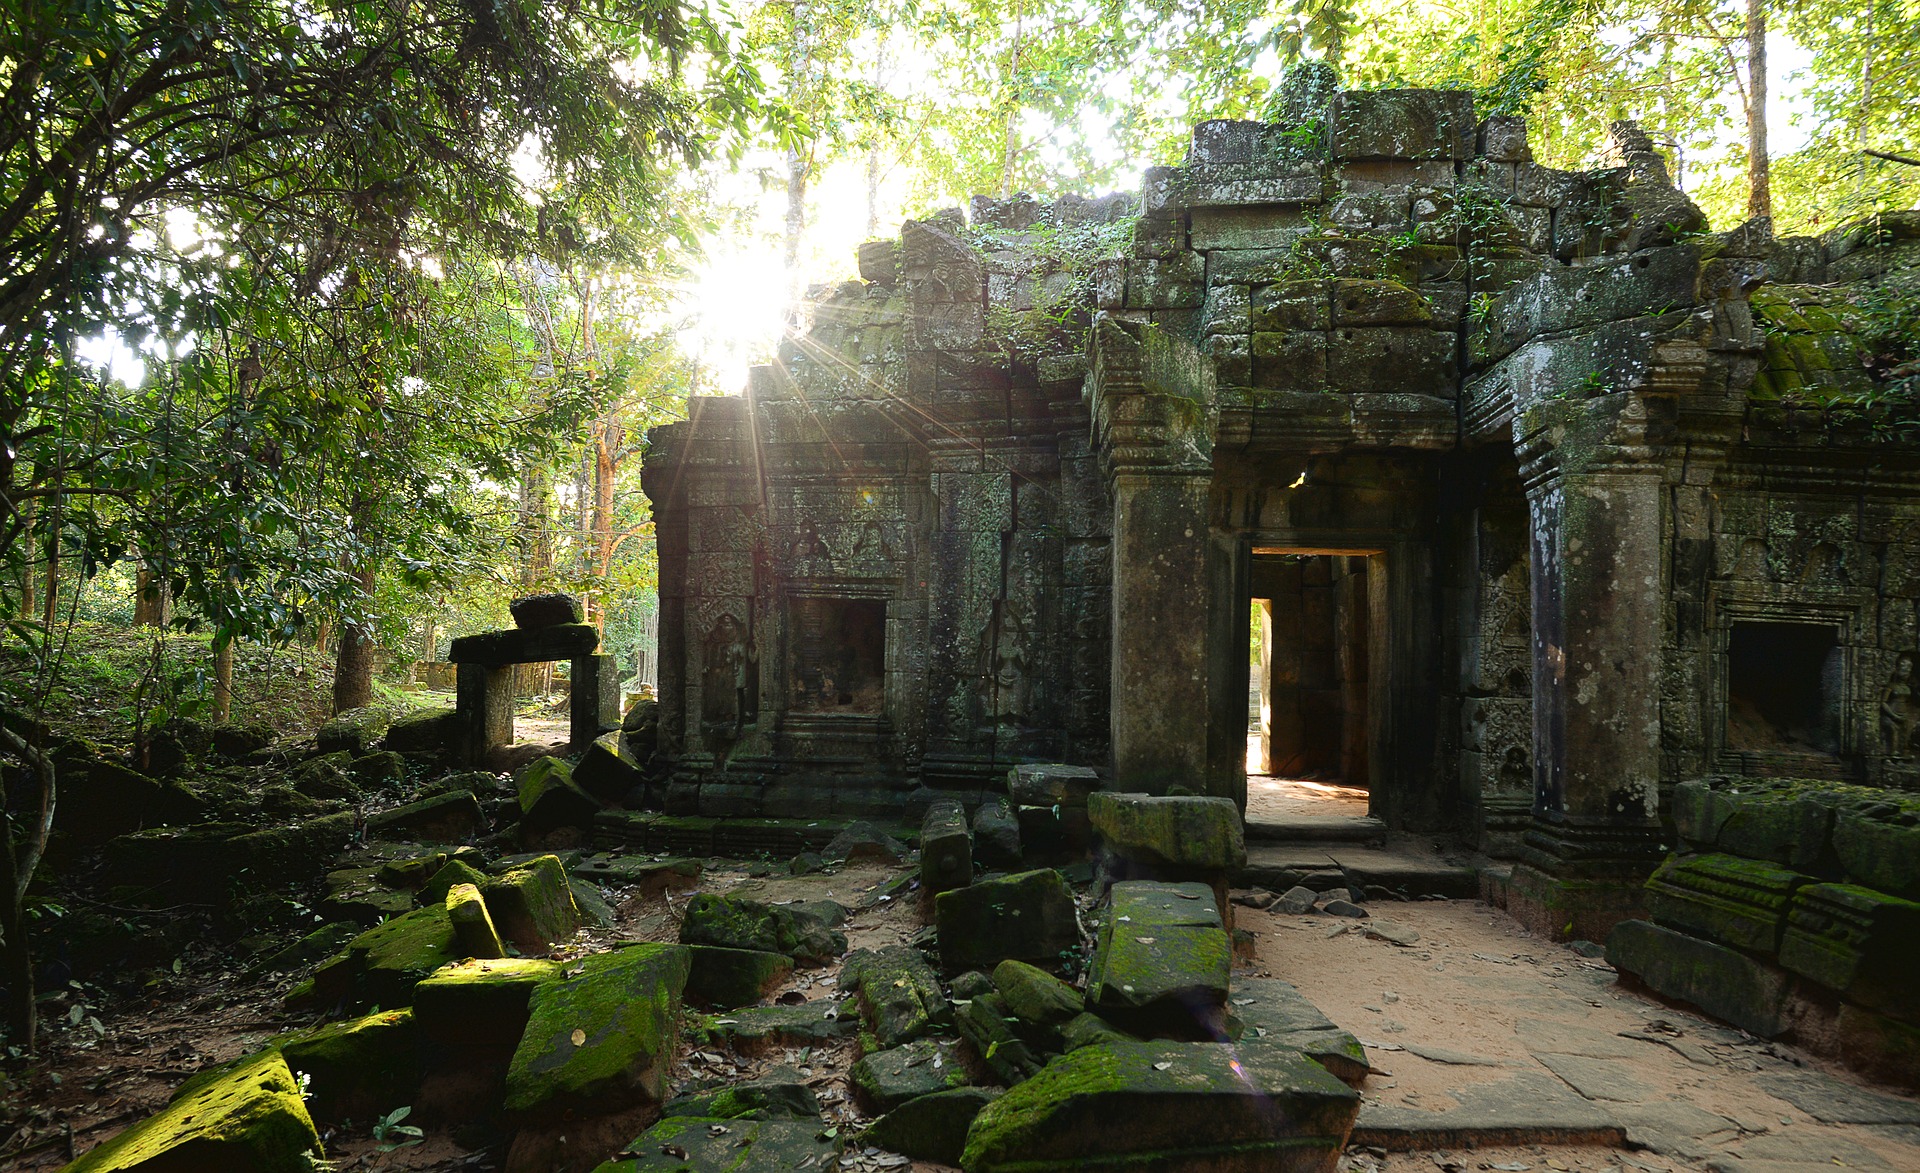 Explore the ancient ruins of Angkor Tom in Siem Reap